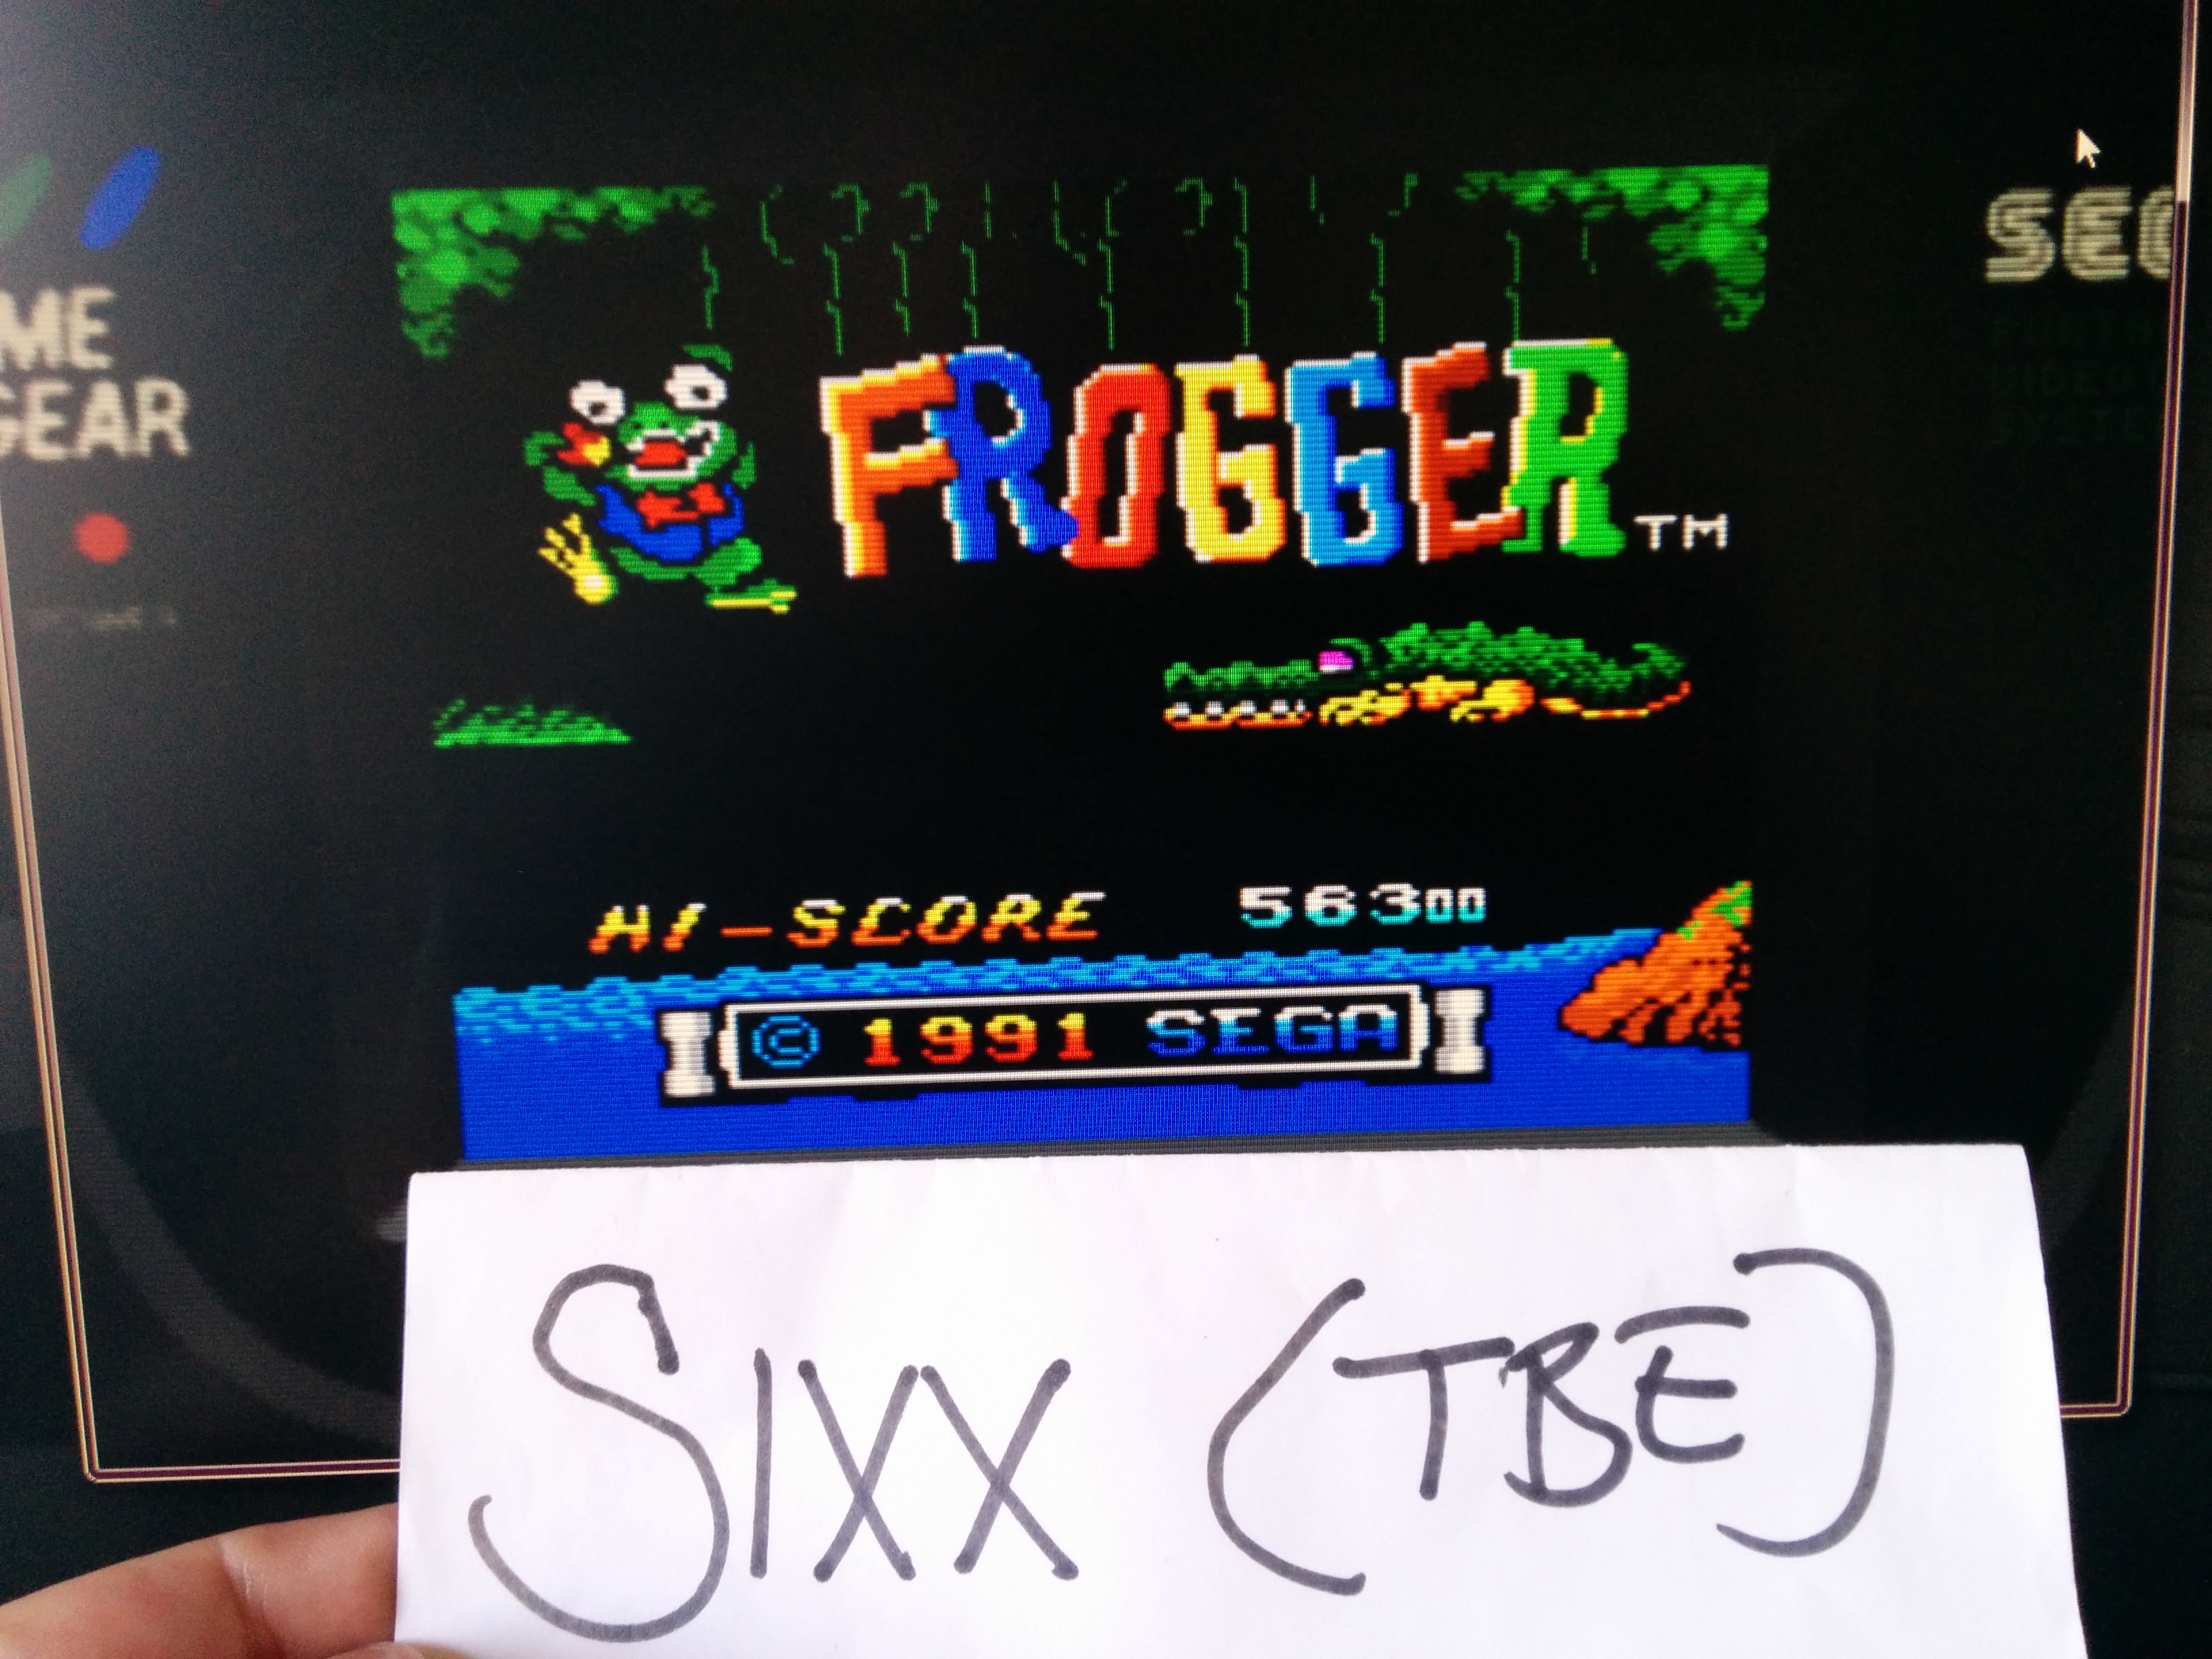 Sixx: Frogger (Sega Game Gear Emulated) 56,300 points on 2014-08-04 10:56:45